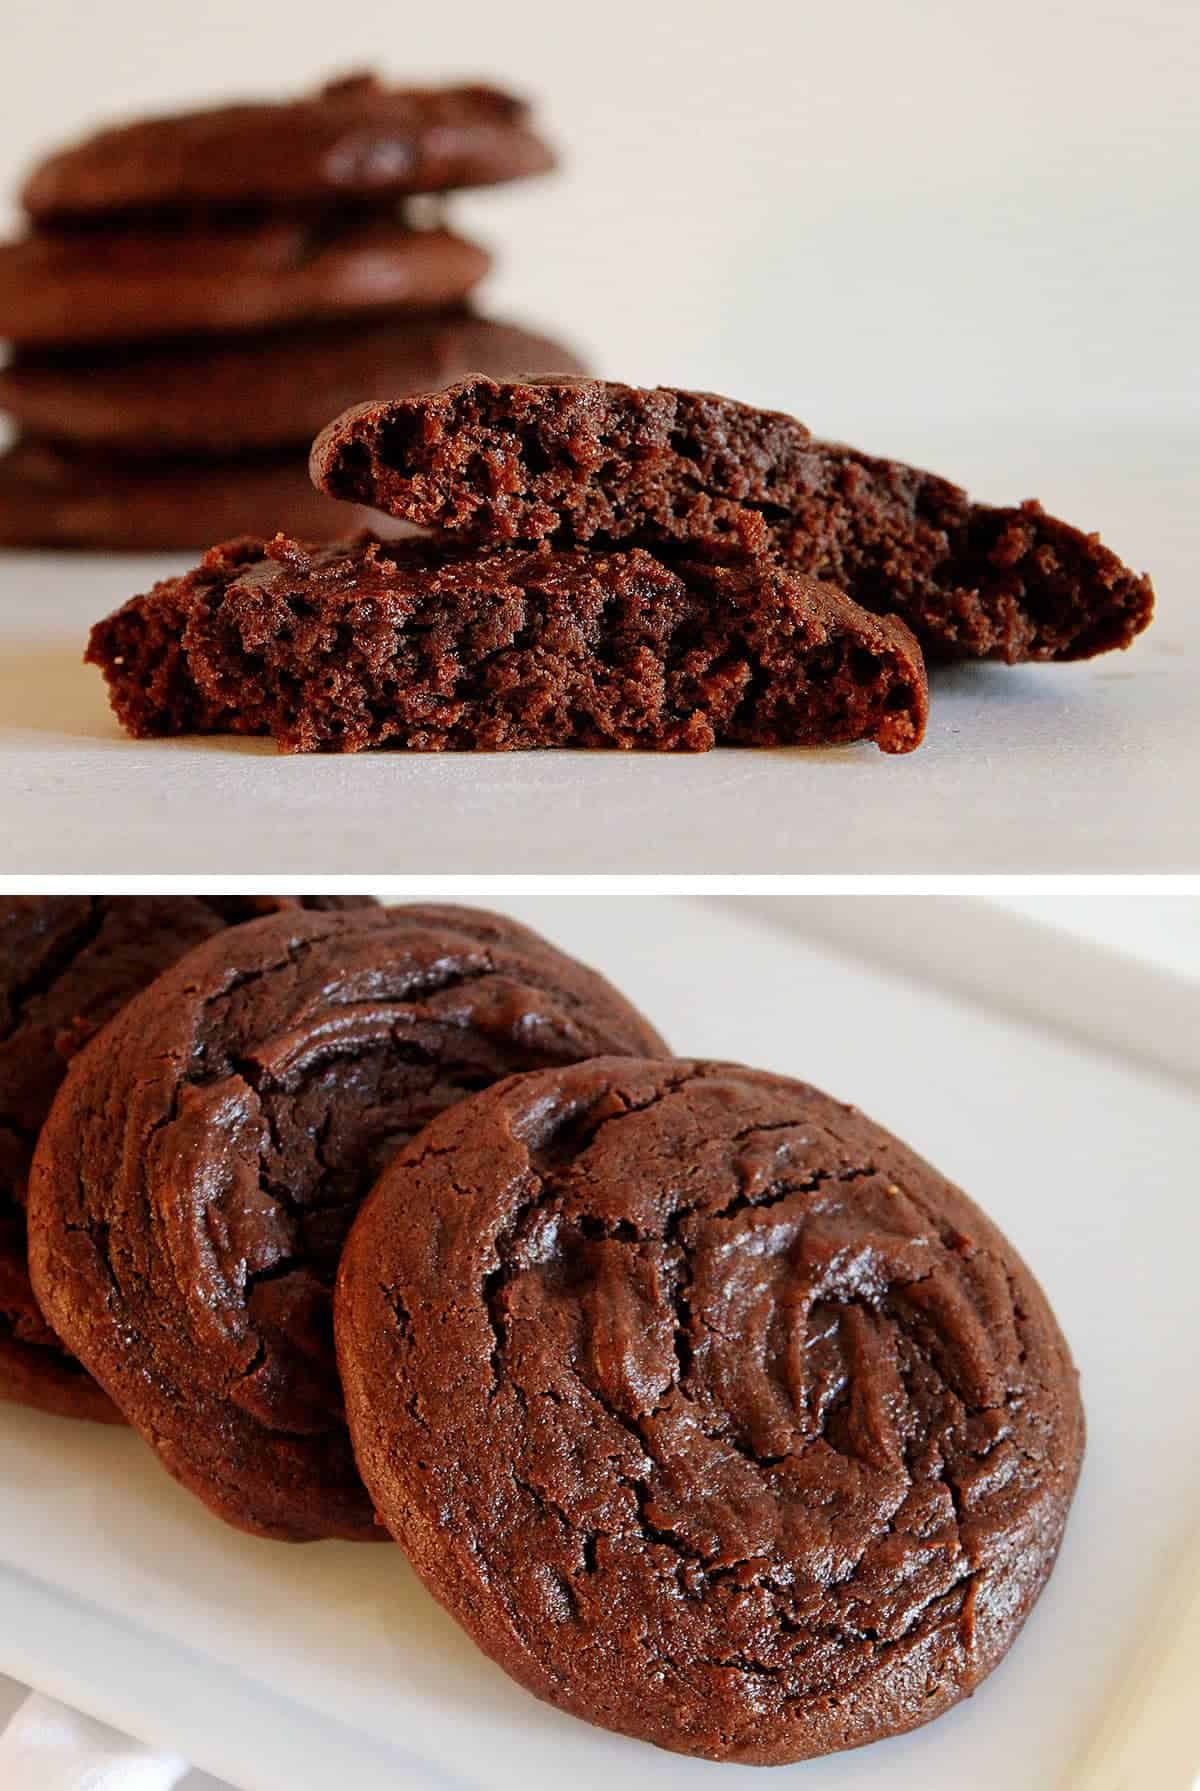 There is an amazing ingredient in these cookies that you would NEVER expect!